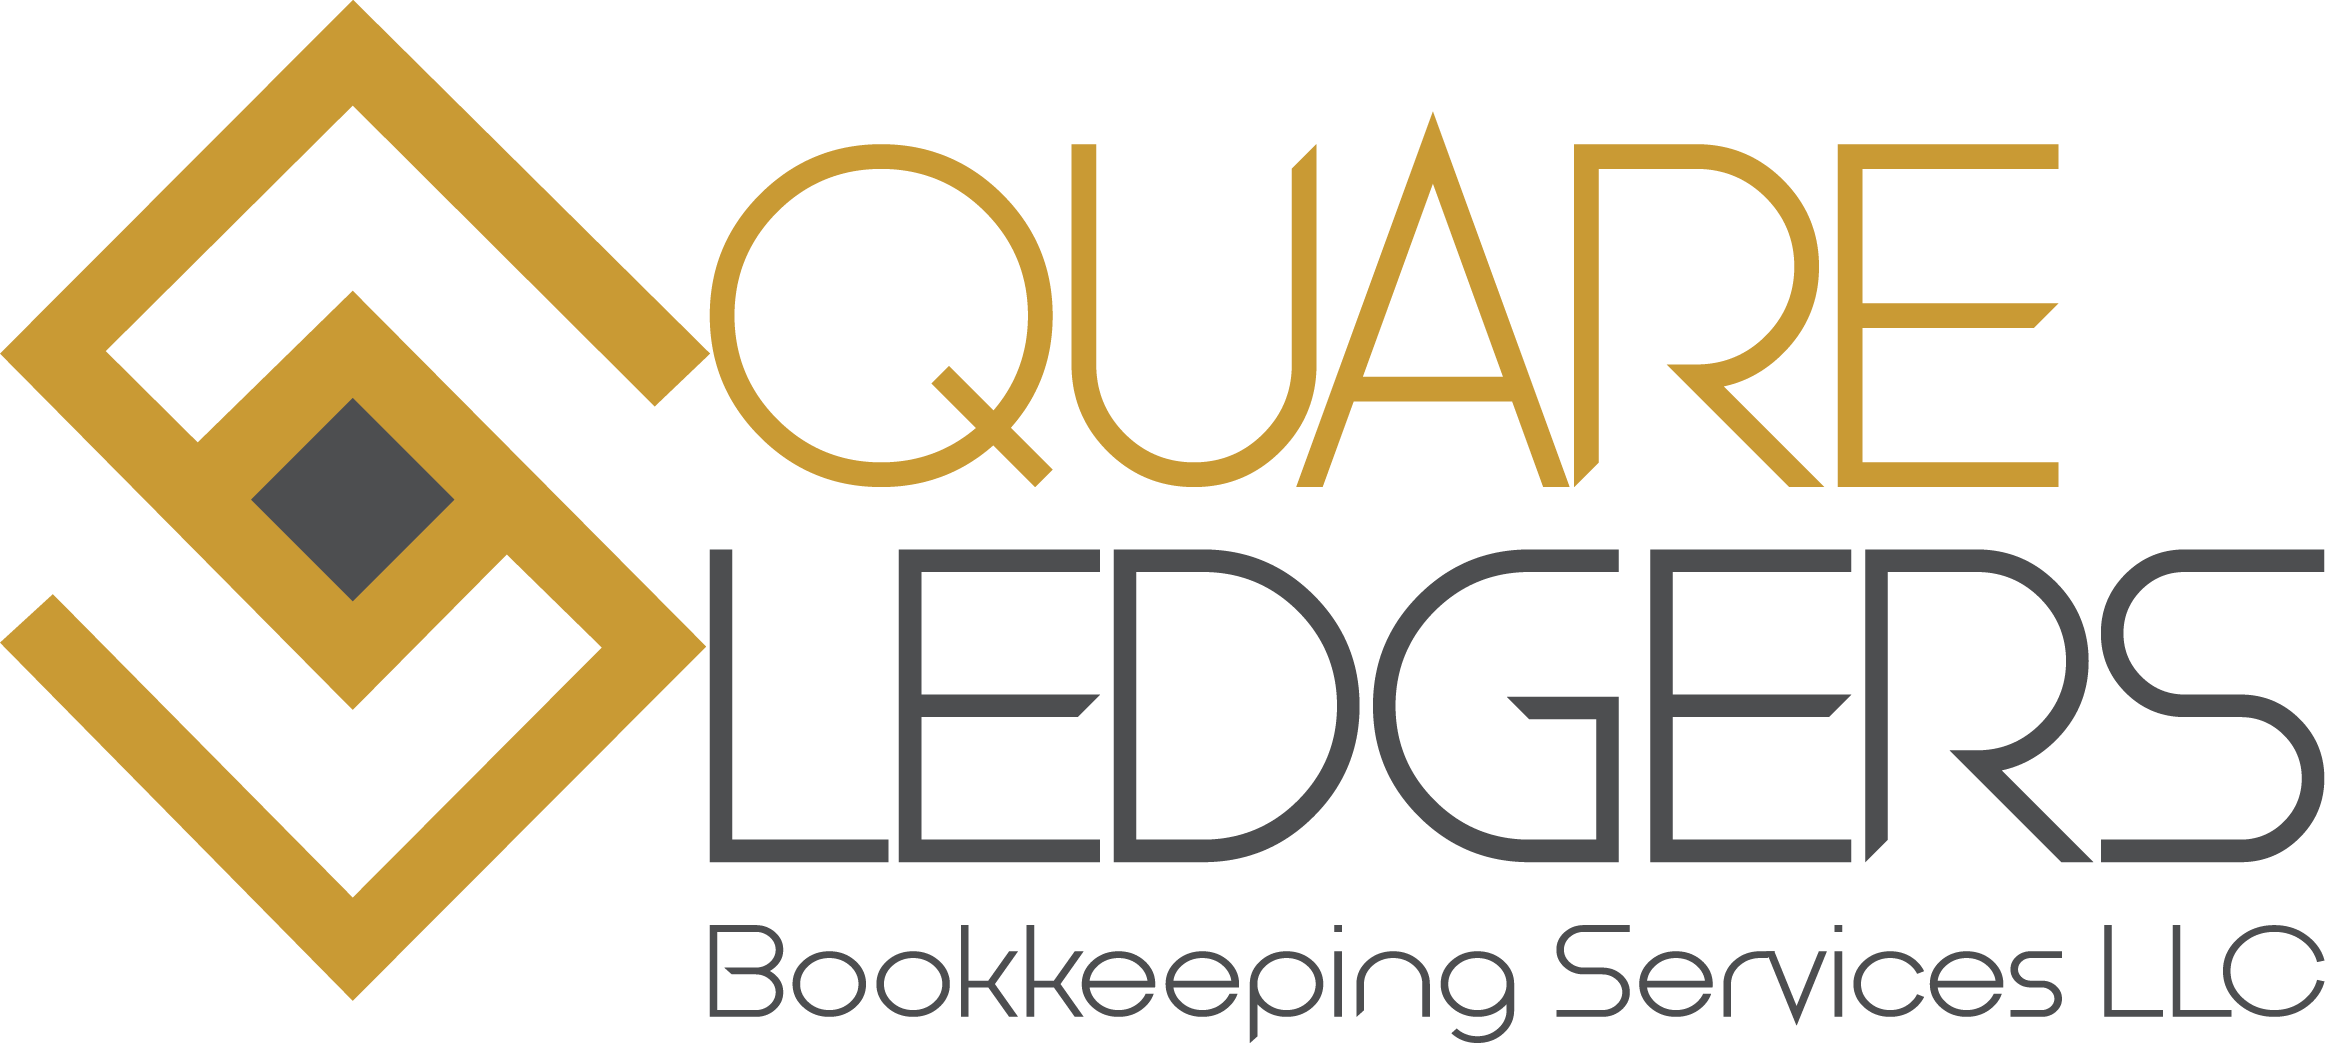 square ledgers bookkeeping